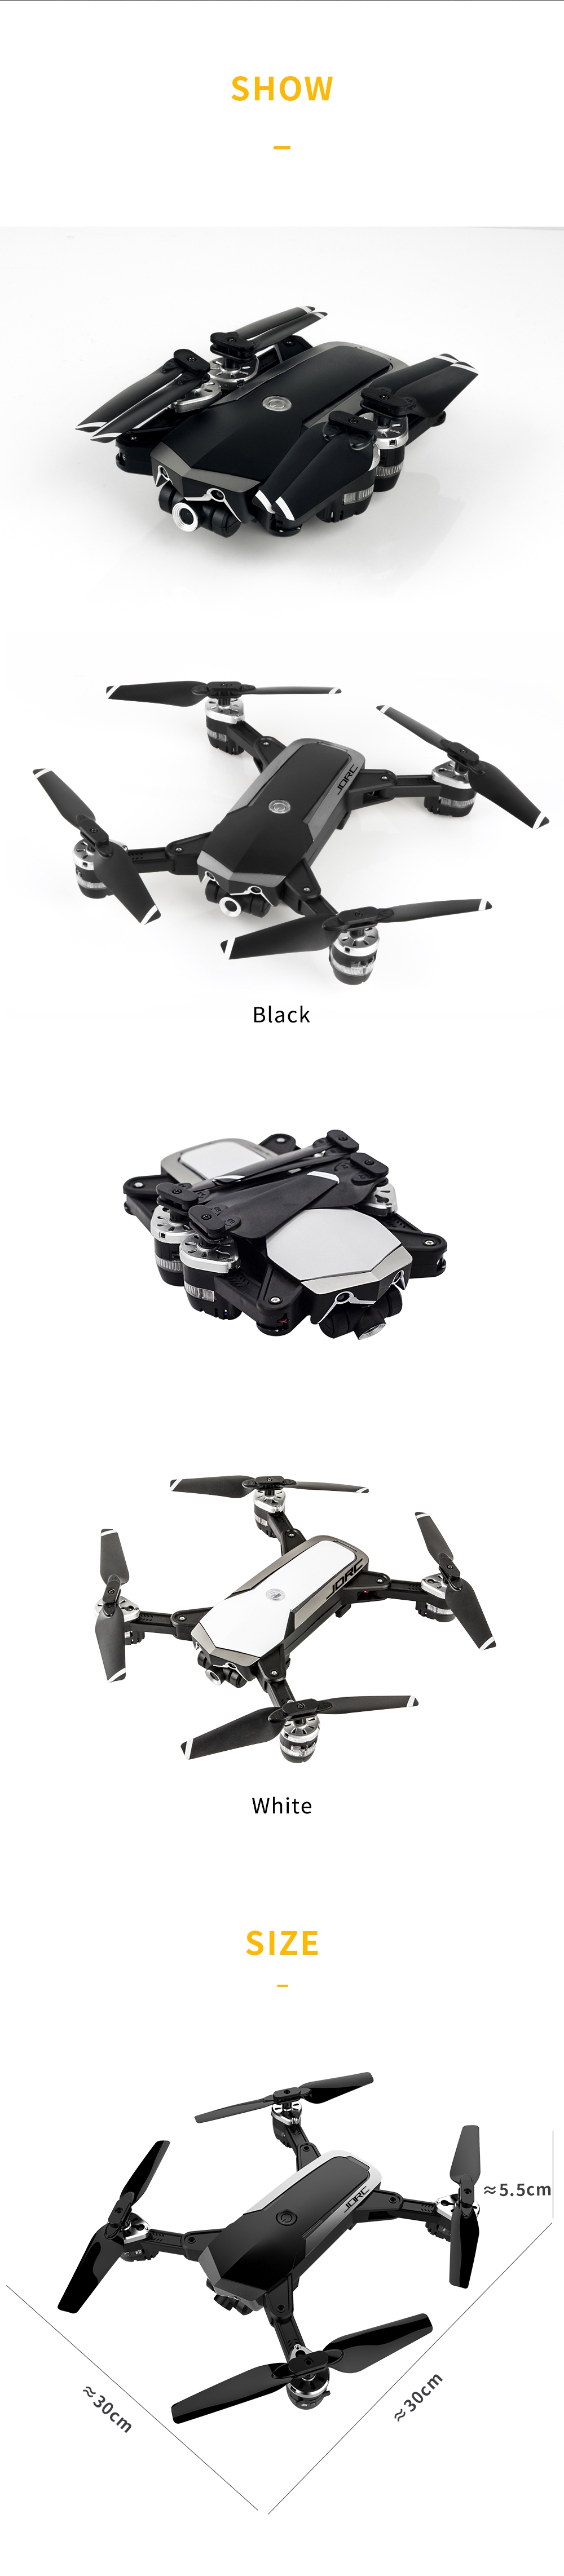 JDRC-JD-20S-JD20S-PRO-WiFi-FPV-w-5MP-1080P-HD-Camera-18mins-Flight-Time-Foldable-RC-Drone-Quadcopter-1400423-6